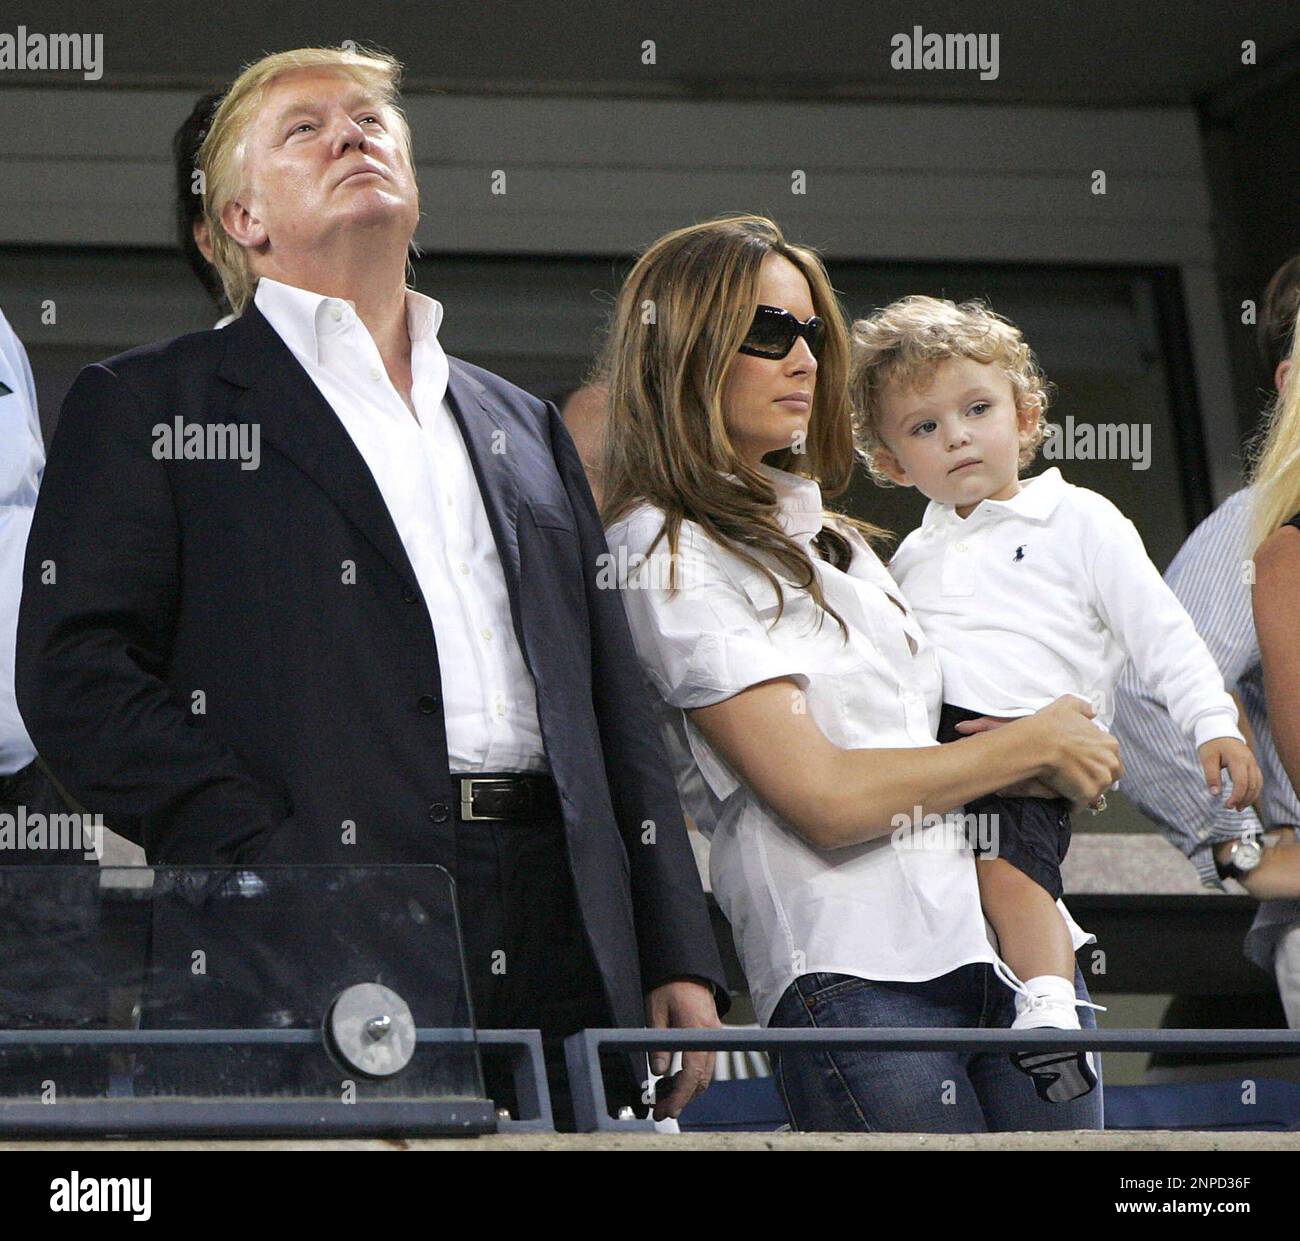 OCTOBER 14th 2020: Barron Trump - son of President of The United States of  America Donald Trump and First Lady Melania Trump - has tested positive for  the COVID-19 coronavirus. - File